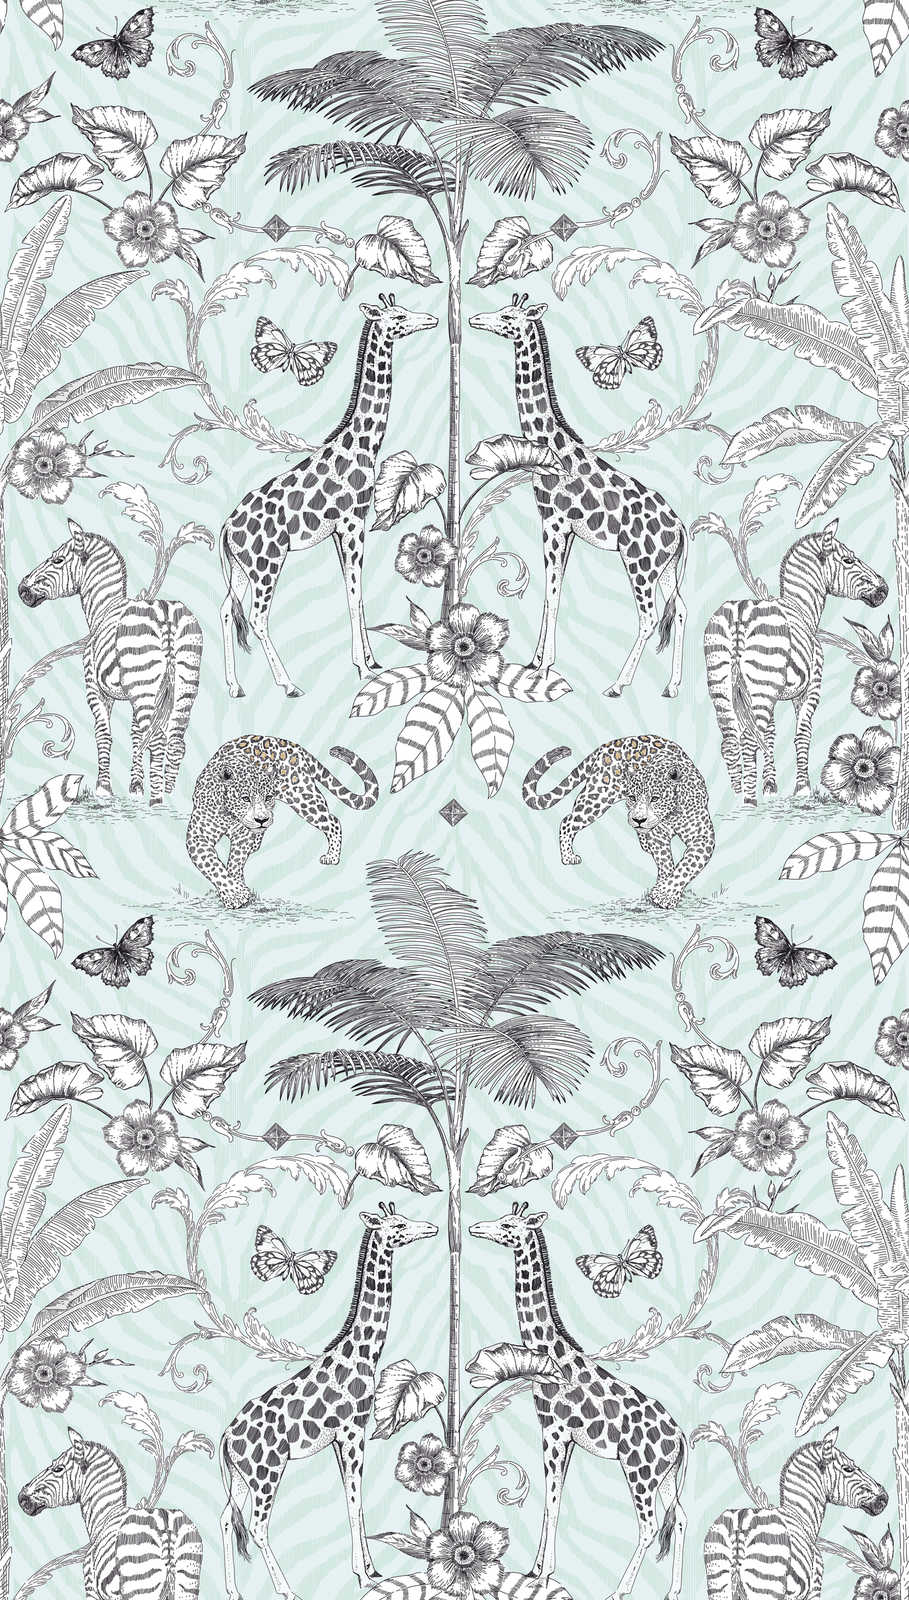             Non-woven wallpaper jungle motif with animals and plants - black, white, grey
        